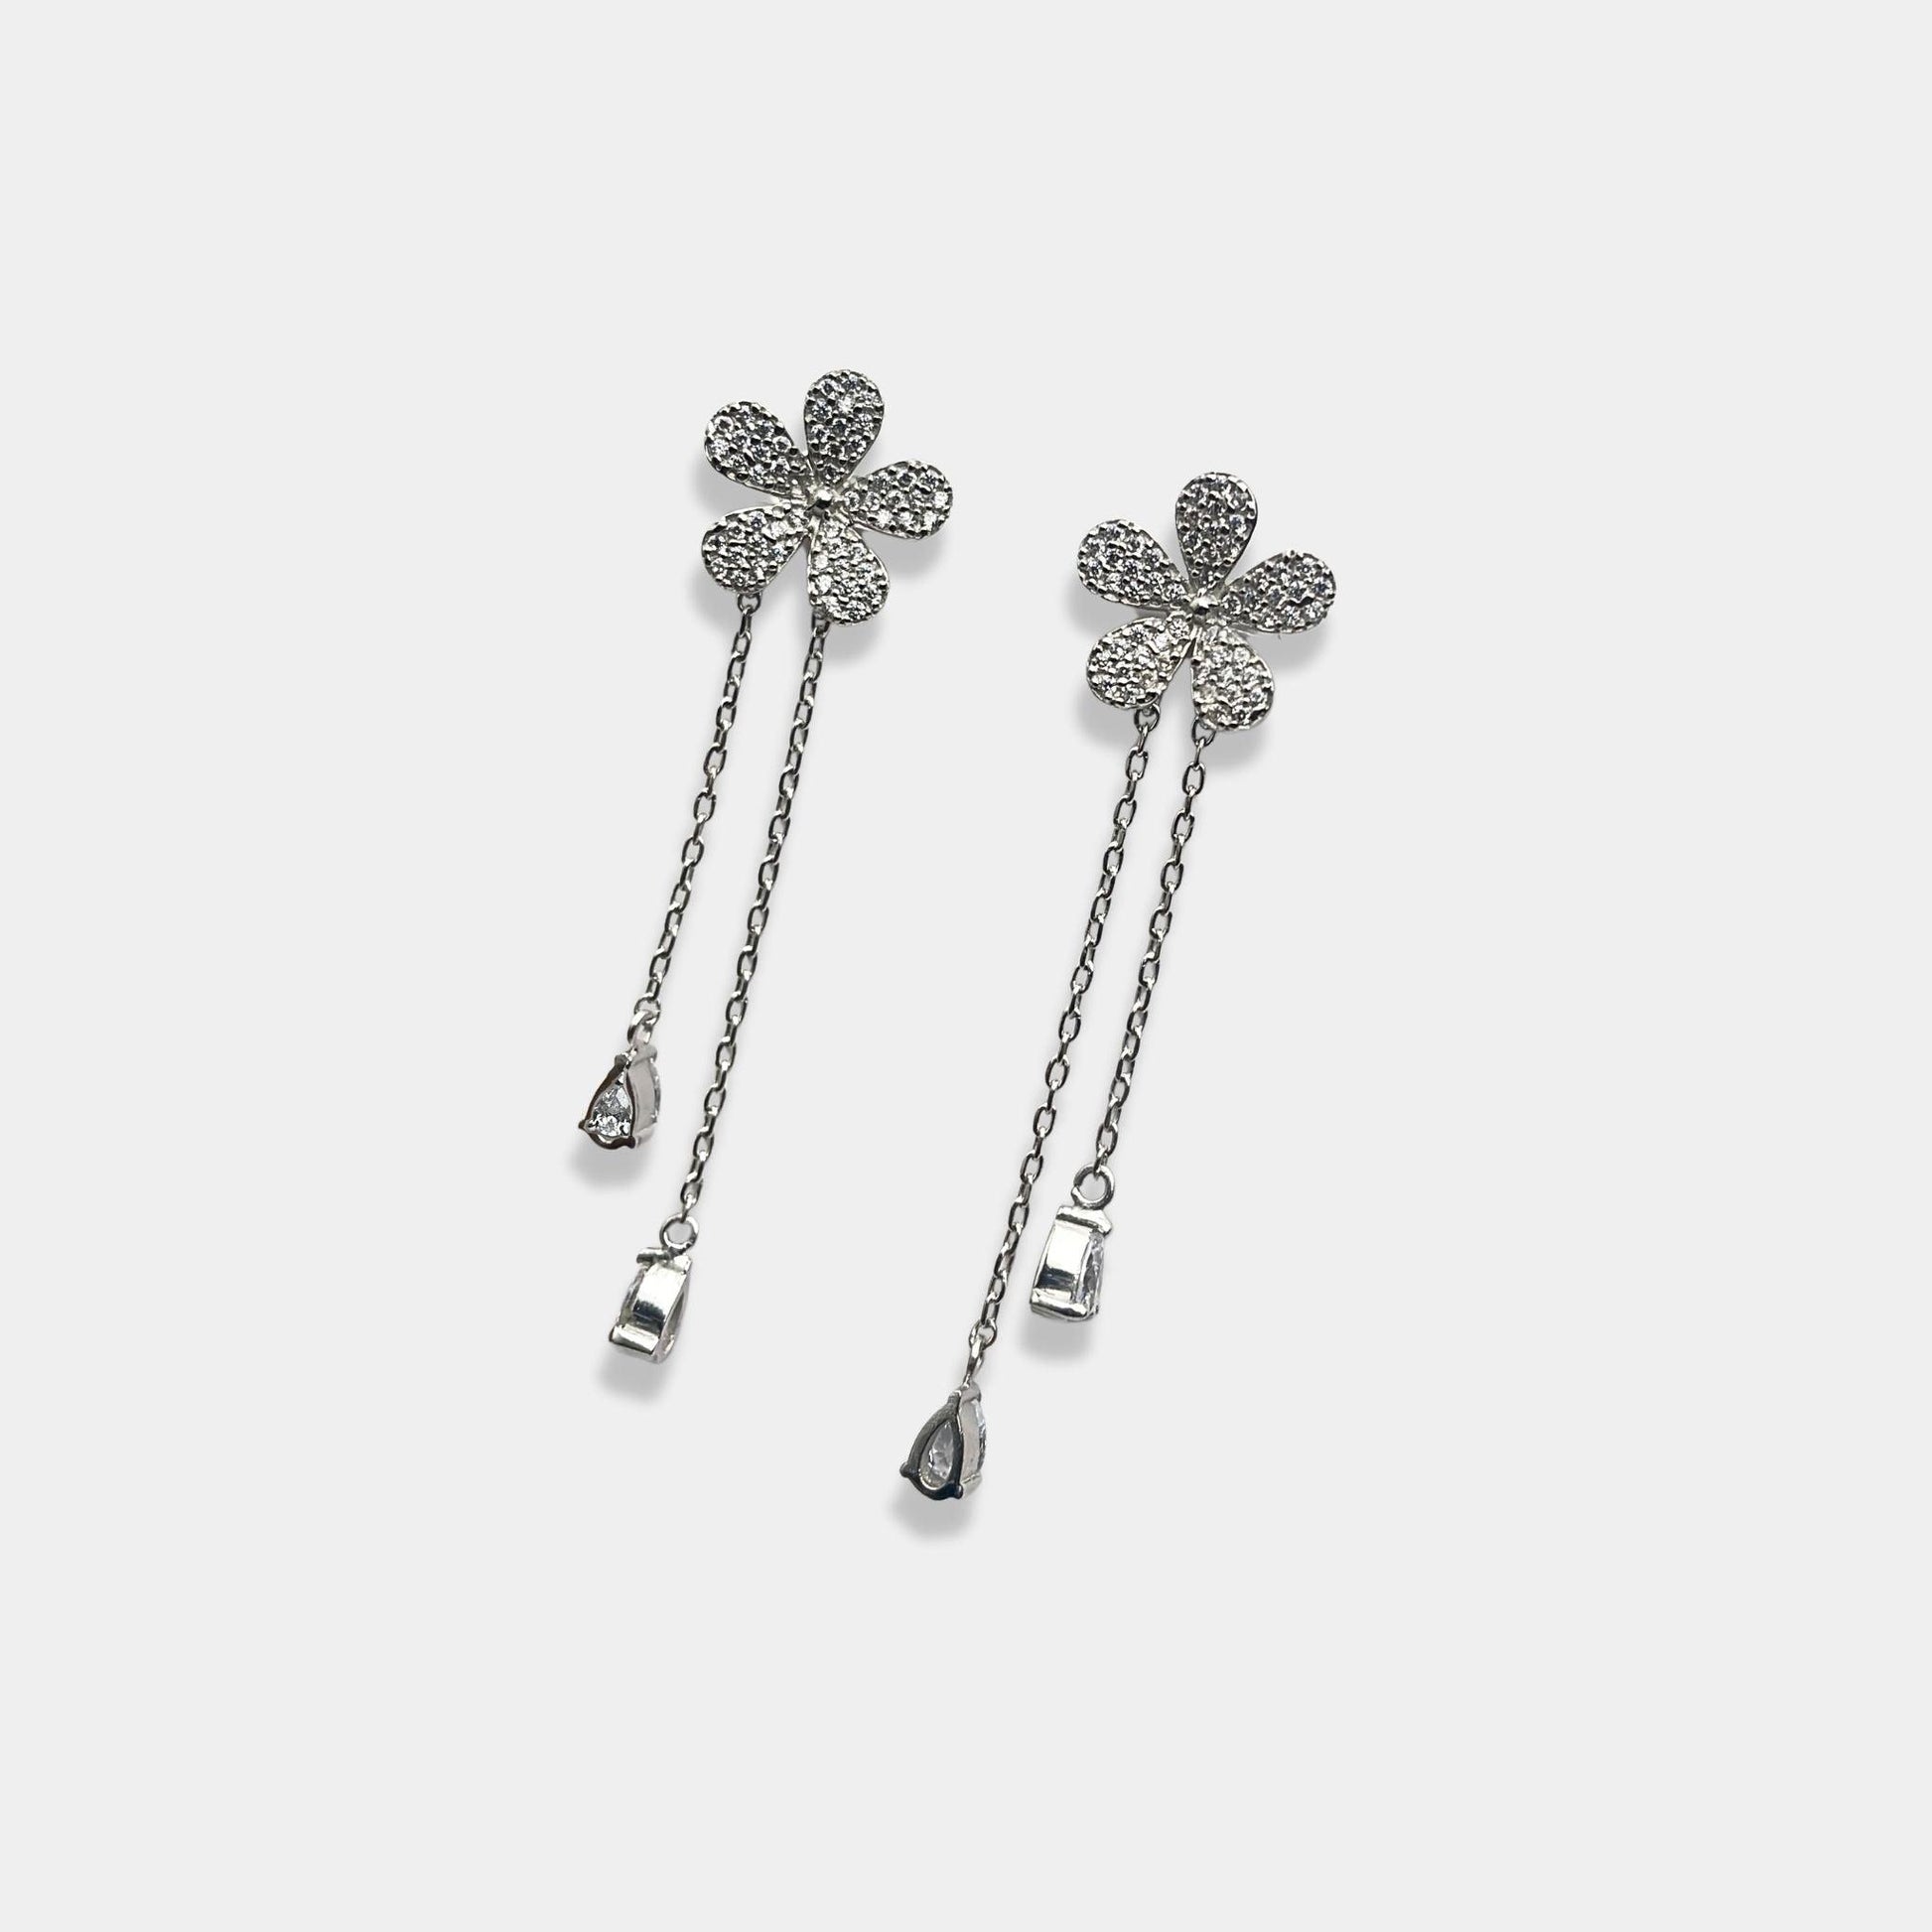 Sterling silver earrings with a beautiful flower pattern, perfect for adding a touch of elegance to any outfit.